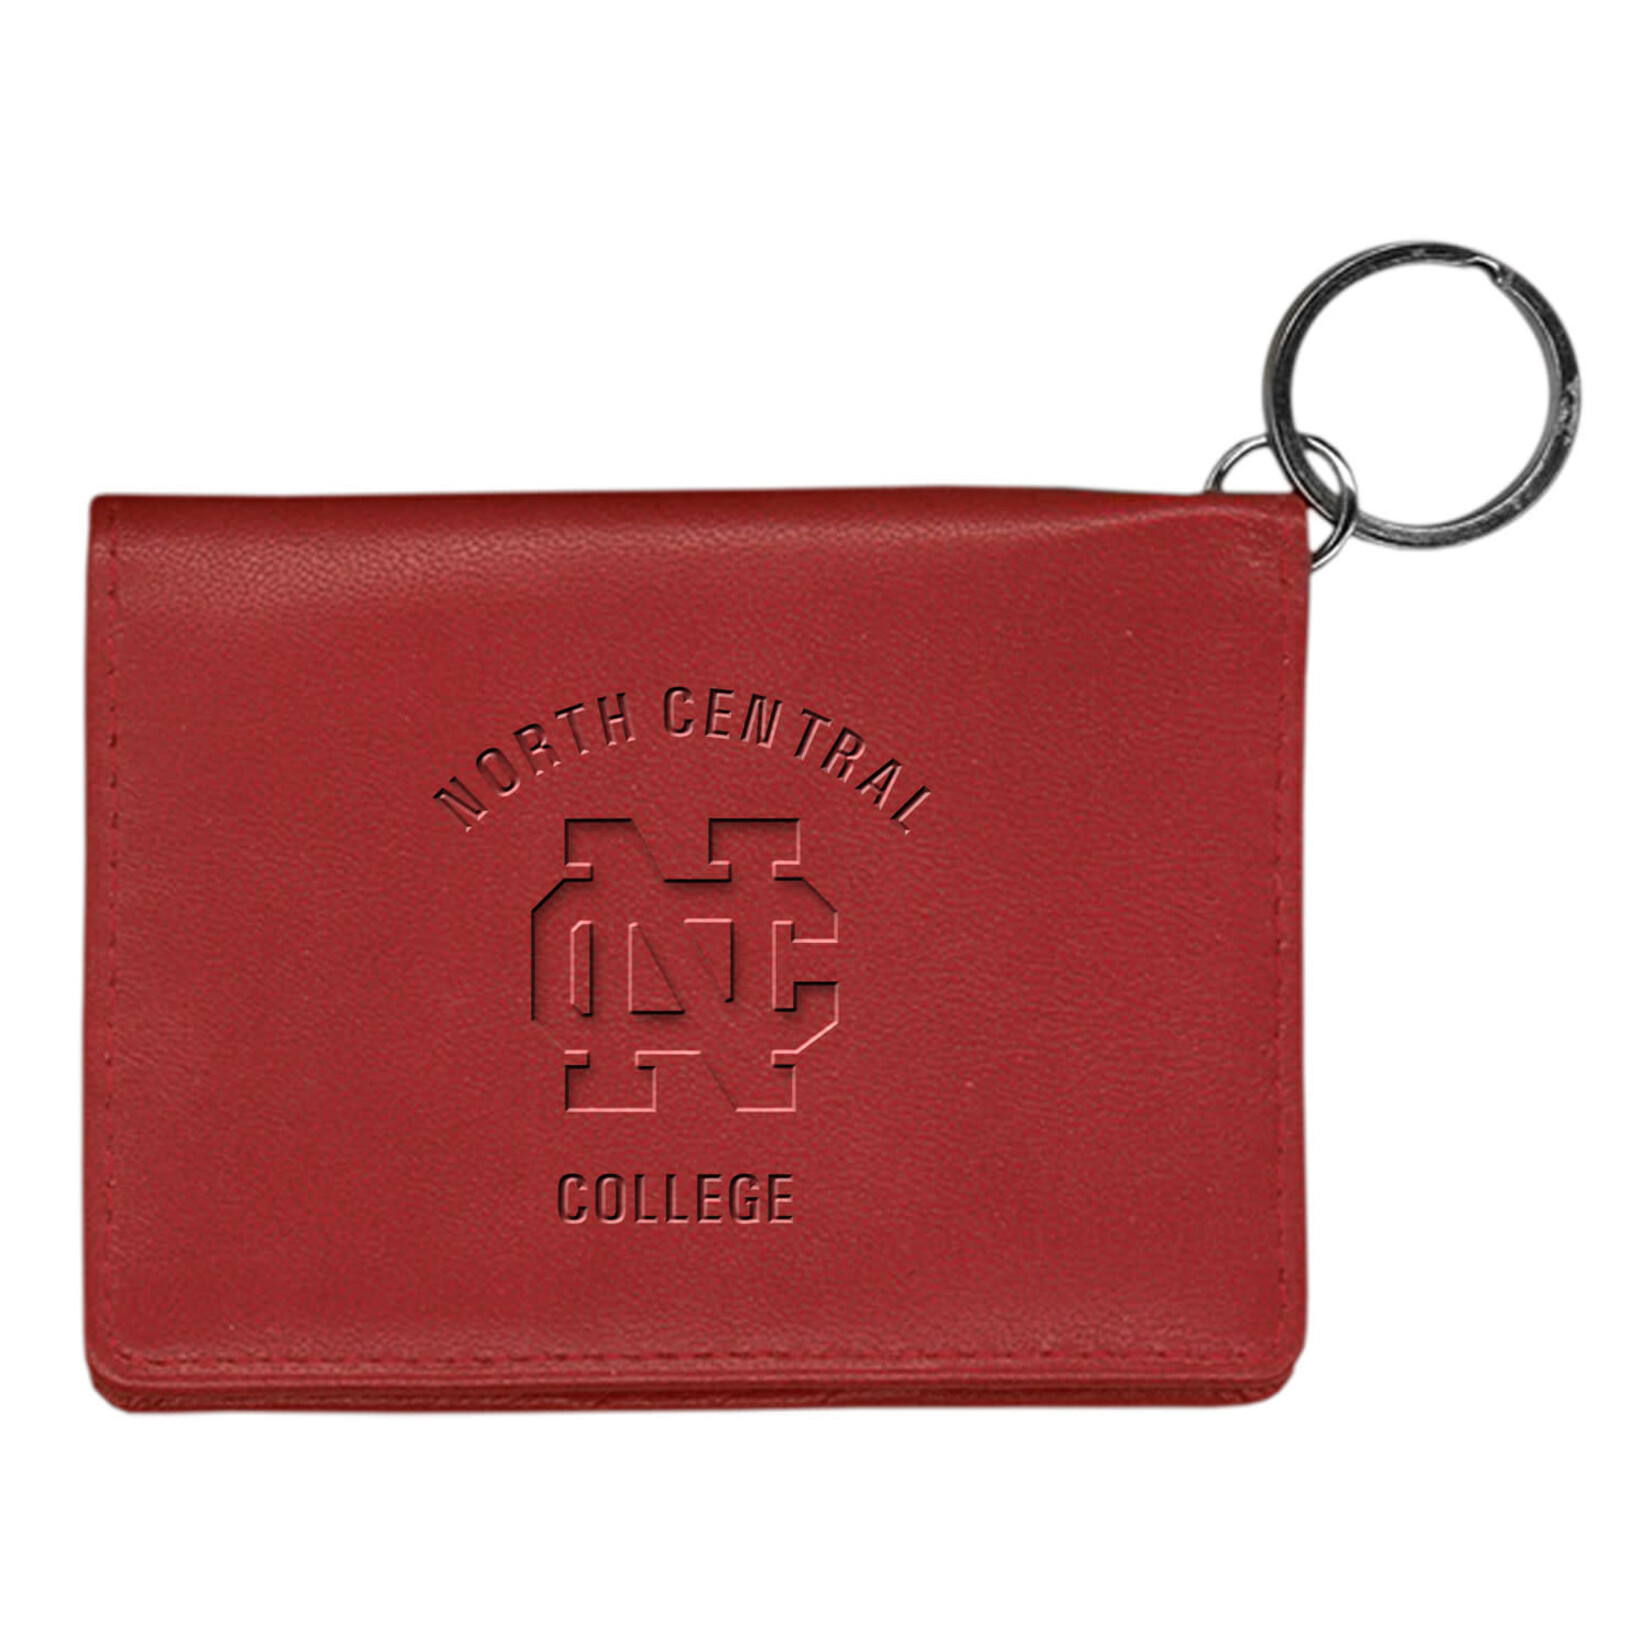 USC Leather ID Holder - Barefoot Campus Outfitter